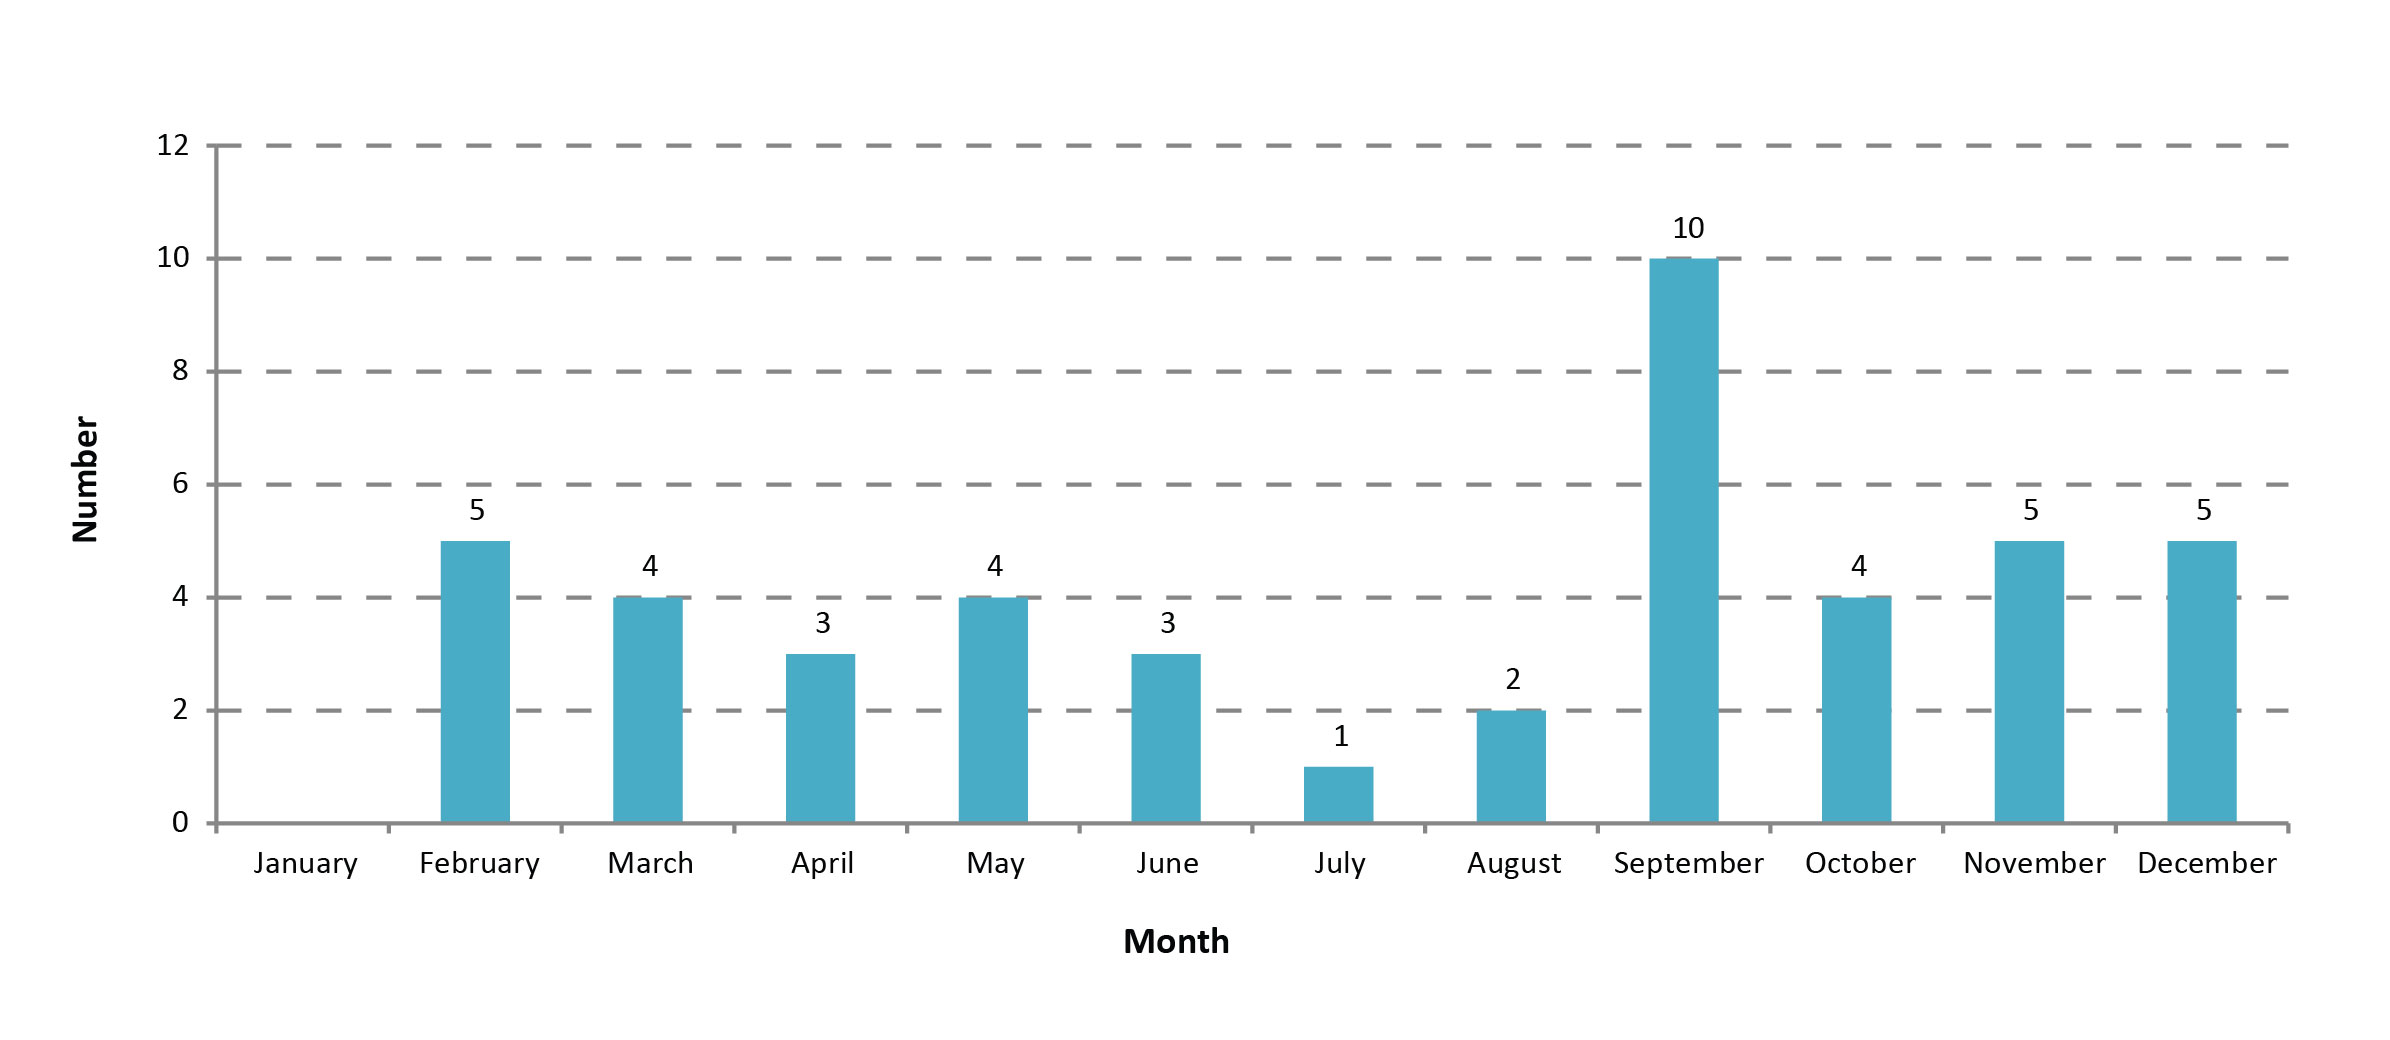 Figure 1: Reported human pathogen or toxin exposure incidents by month of incident, Canada 2016